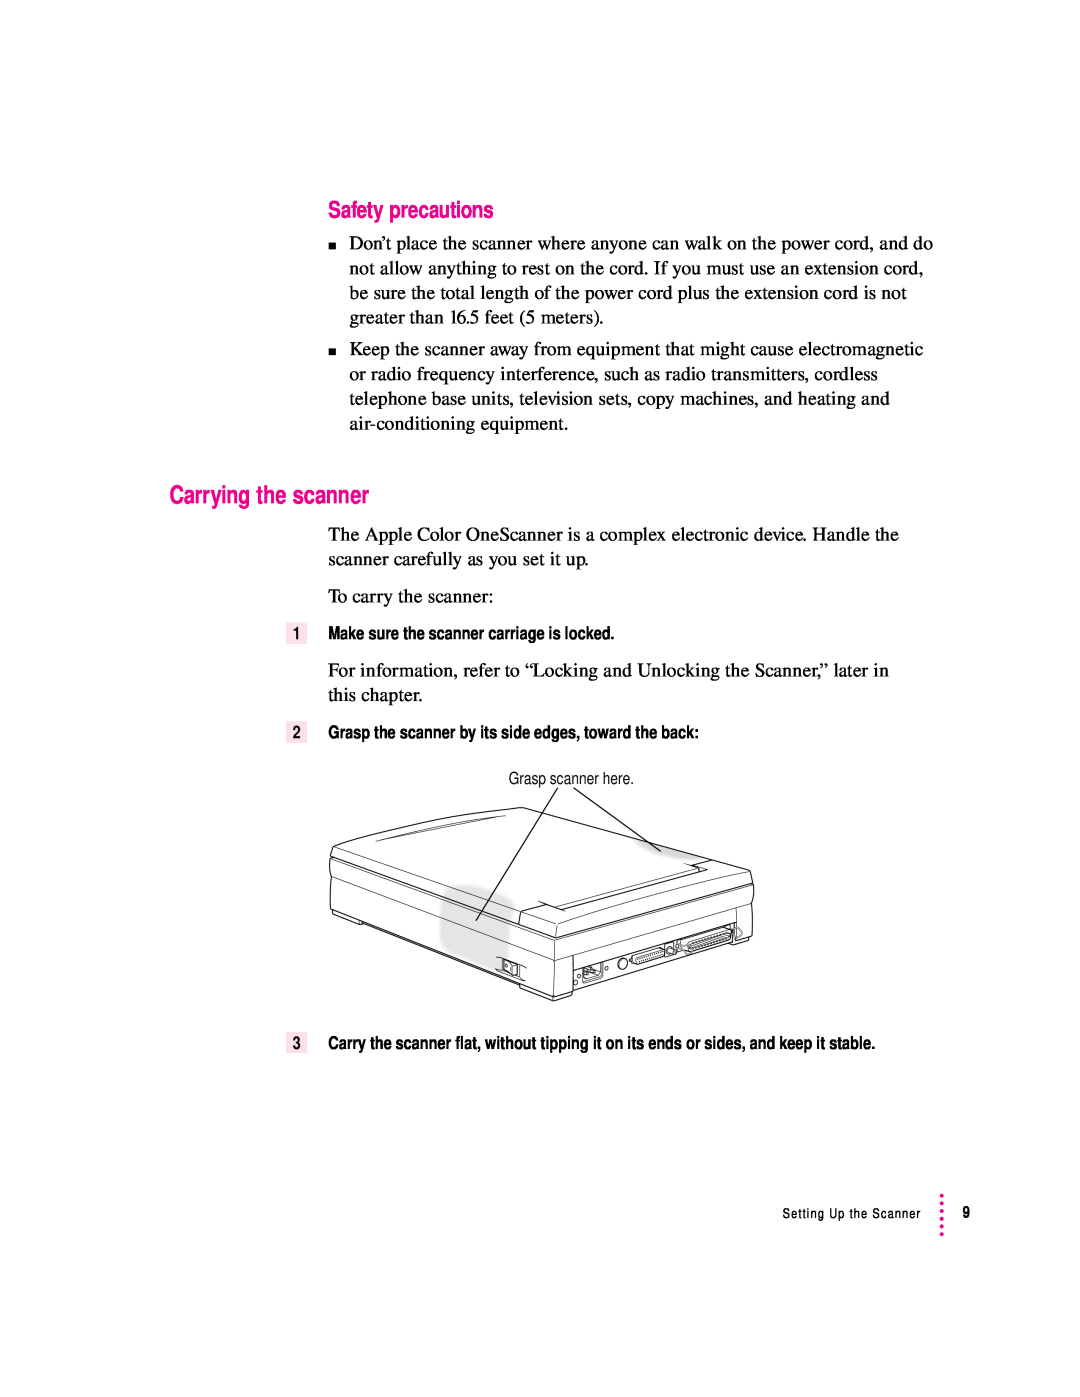 Apple 1230, 627 user manual Carrying the scanner, Safety precautions 